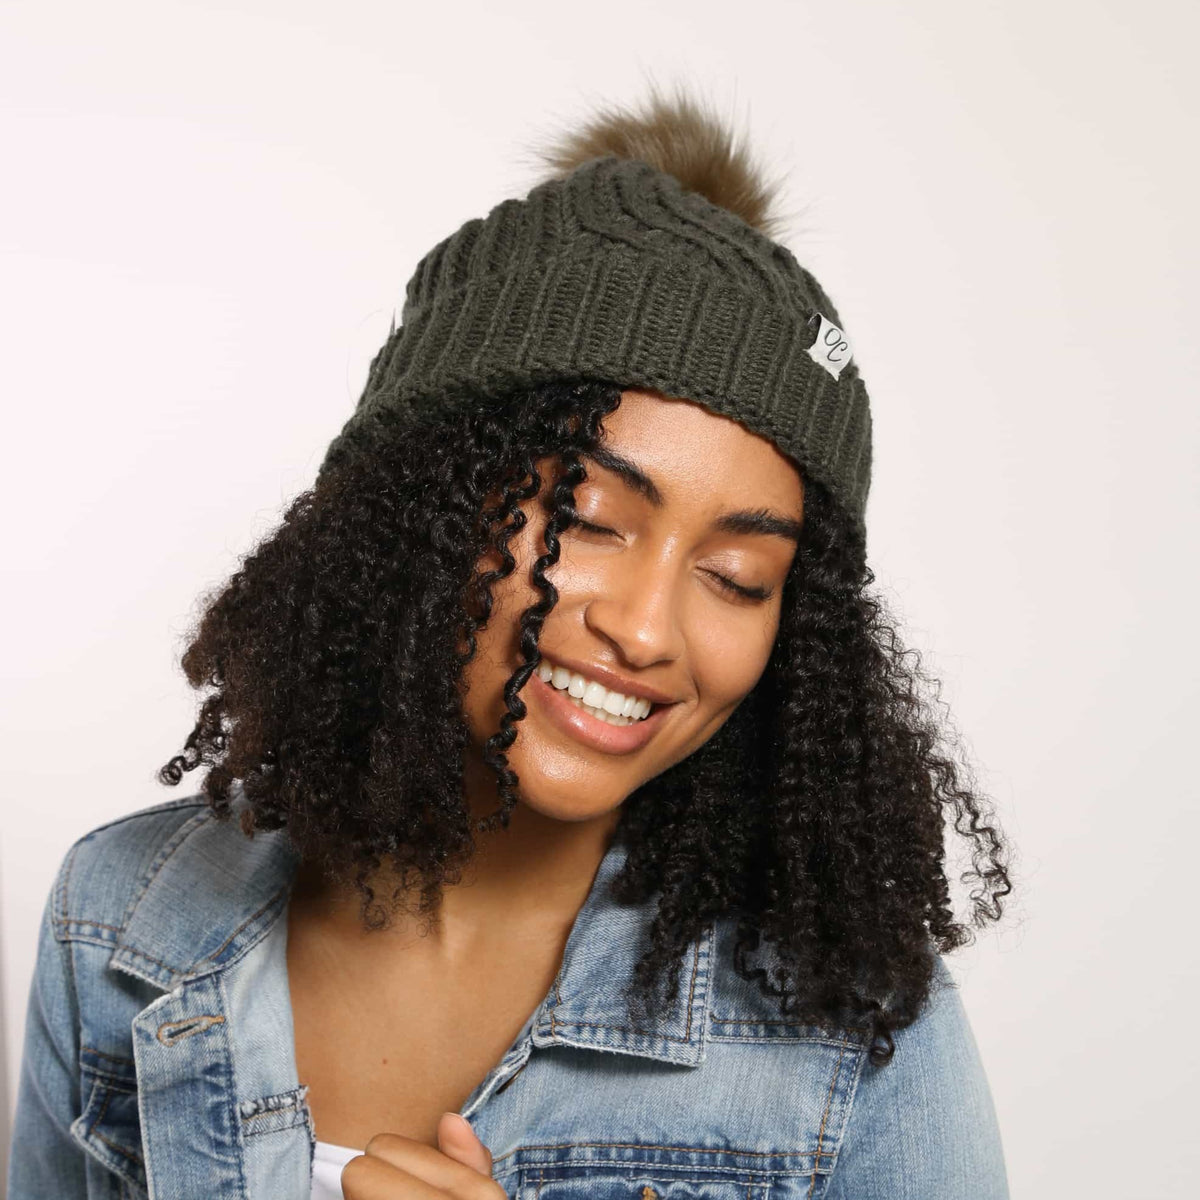 Only Curls Satin Lined Knitted Beanie Hat - Olive with Pom Pom - Only Curls